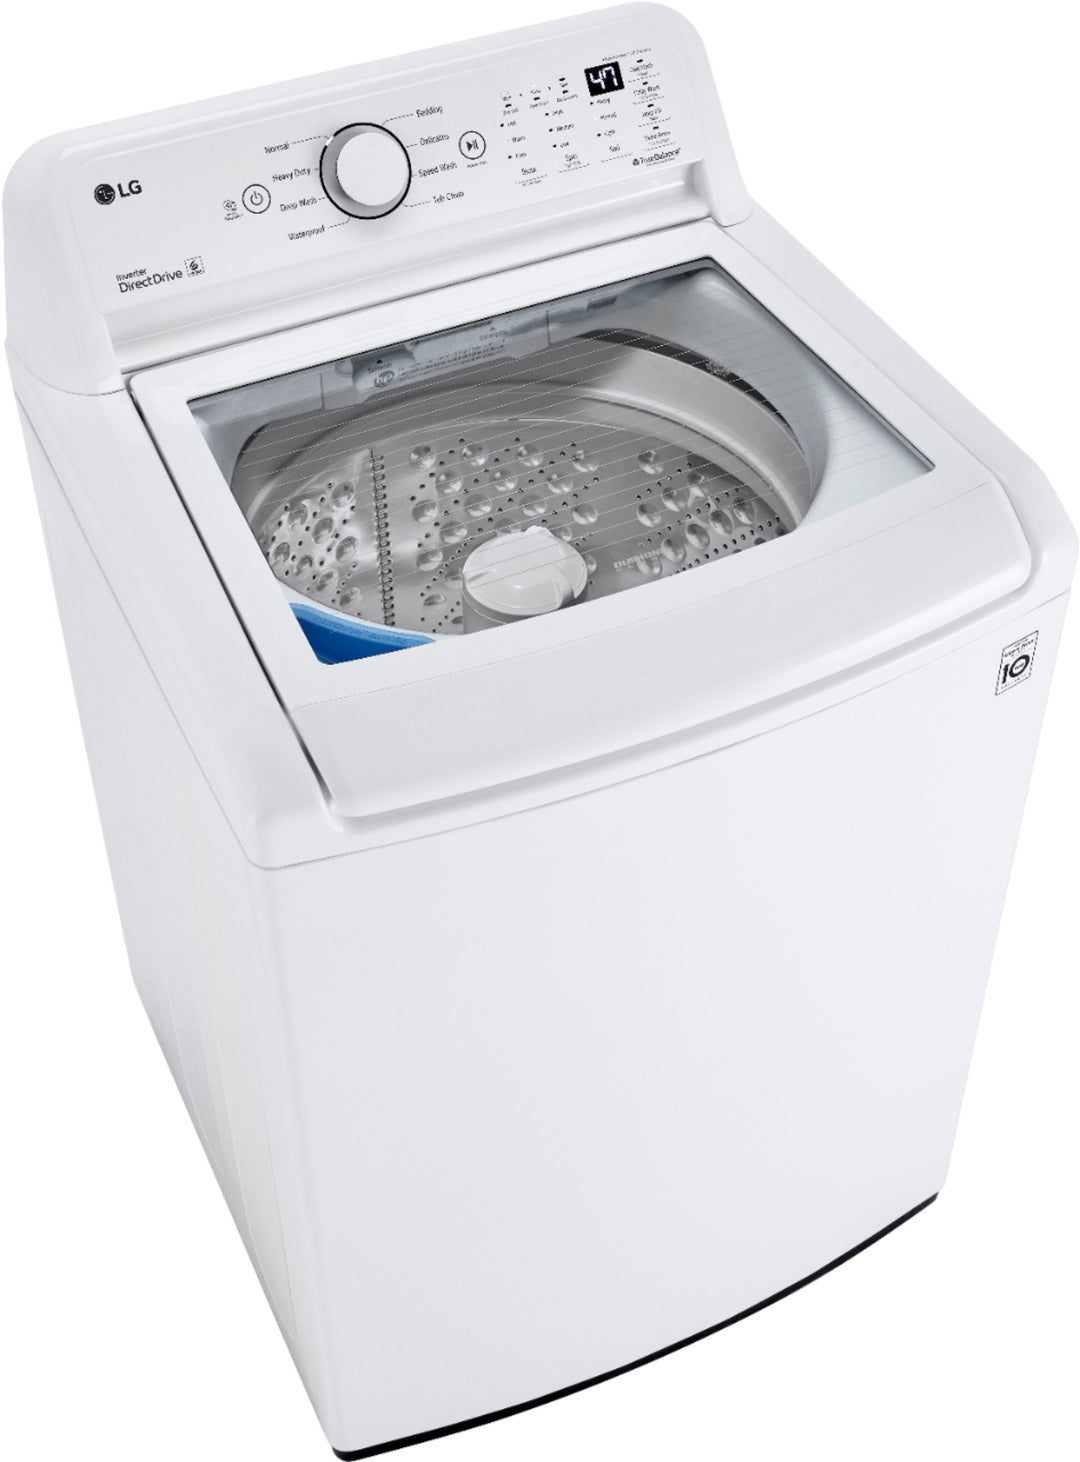 LG - 4.3 Cu. Ft. High-Efficiency Smart Top Load Washer with TurboDrum Technology - White_3